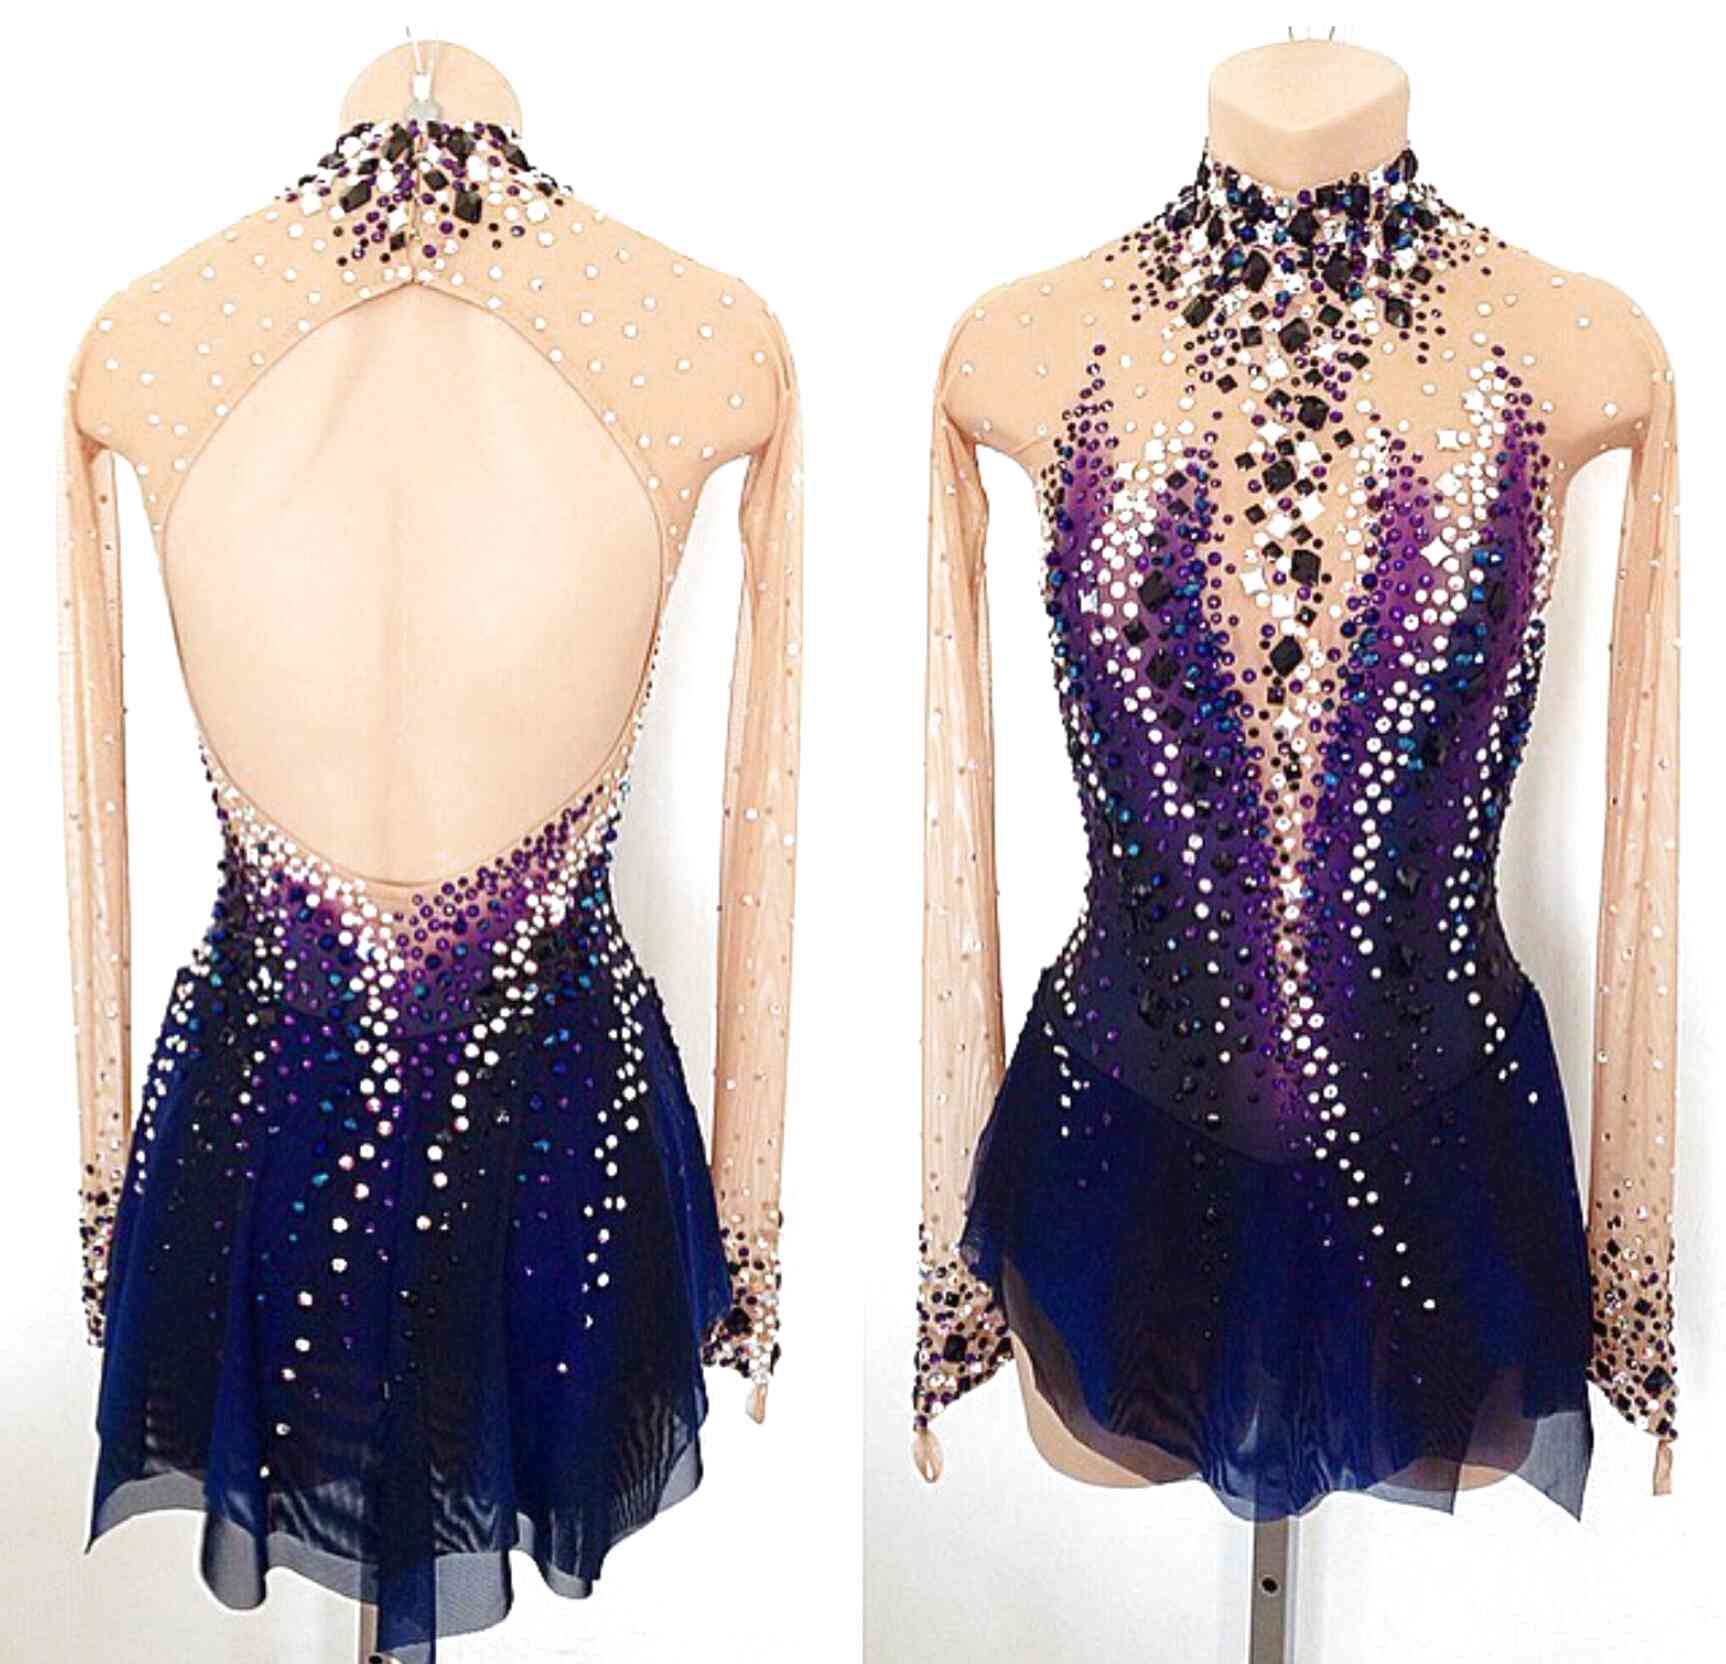 Figure Skating Competition Dresses for sale in UK | 24 used Figure ...